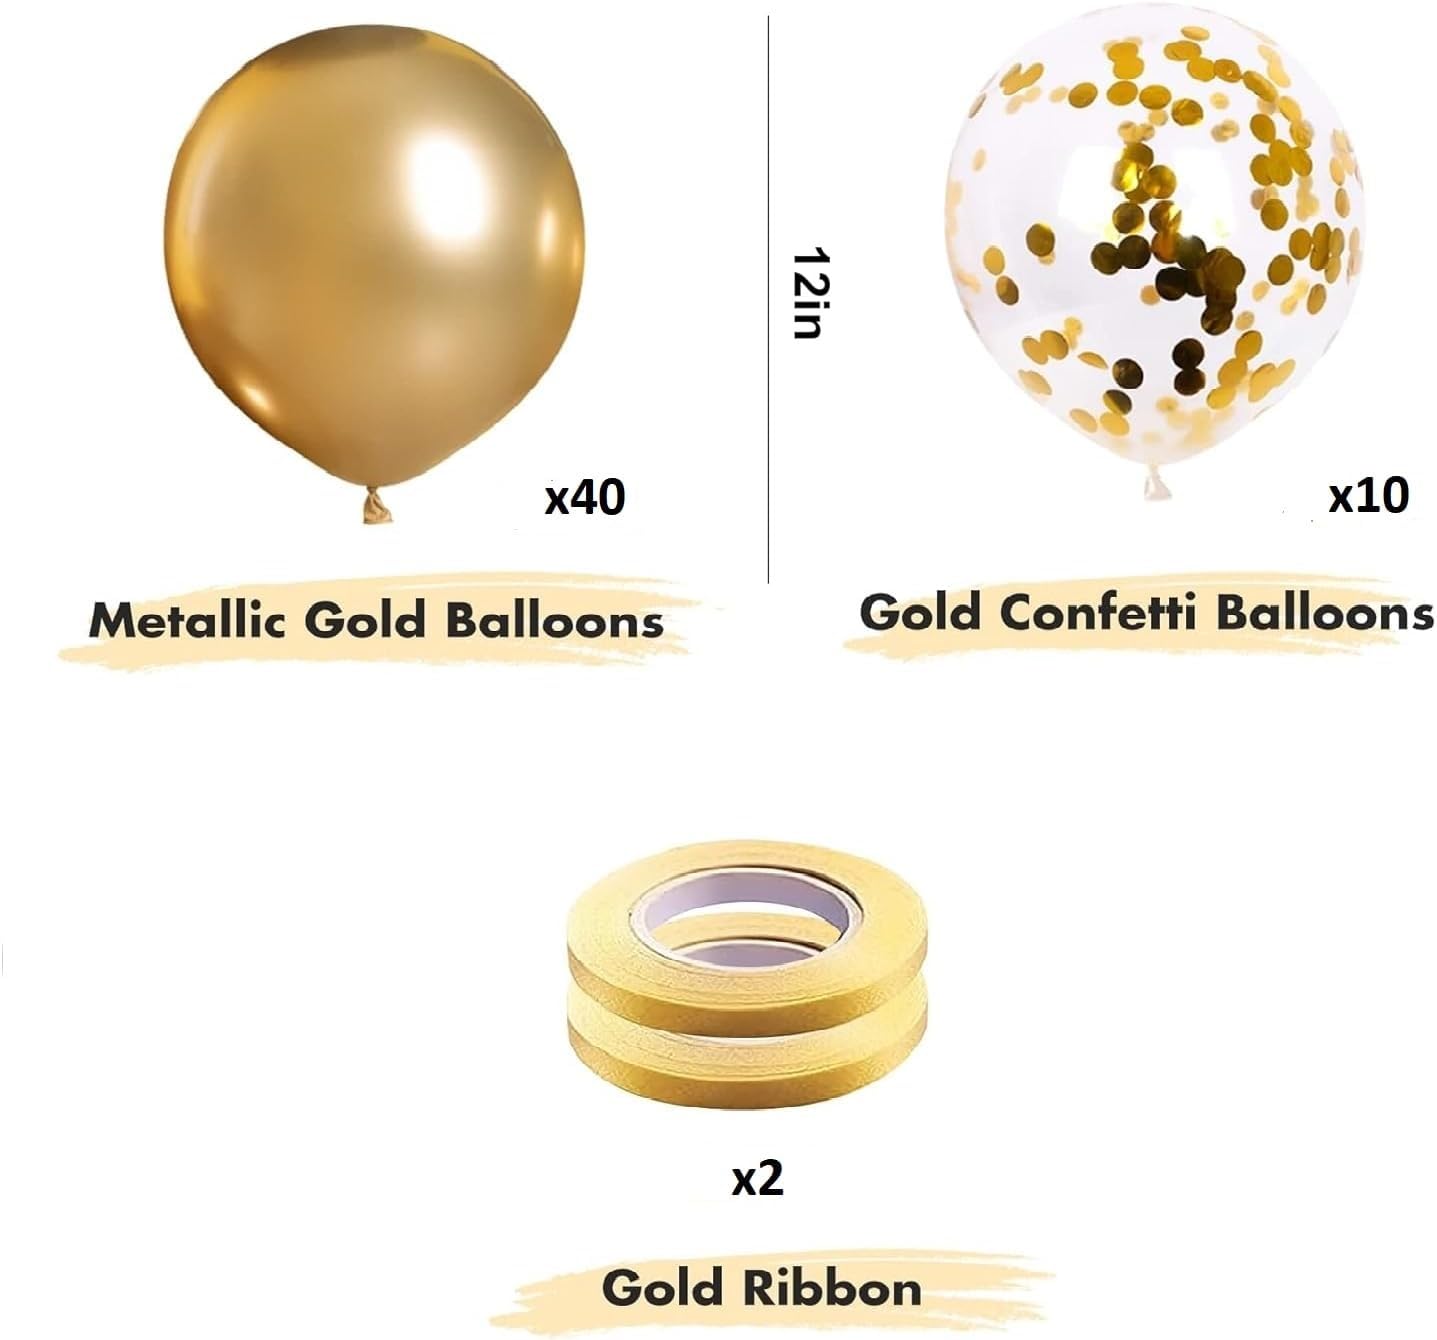 OHugs Gold Balloons - Pack of 50 Pcs 12 Inch 40 Metallic Gold Balloons & 10 Gold Confetti Balloons for Birthday Party Decorations, Baby Shower Decor, Wedding Event, Congratulation Graduation Ceremony